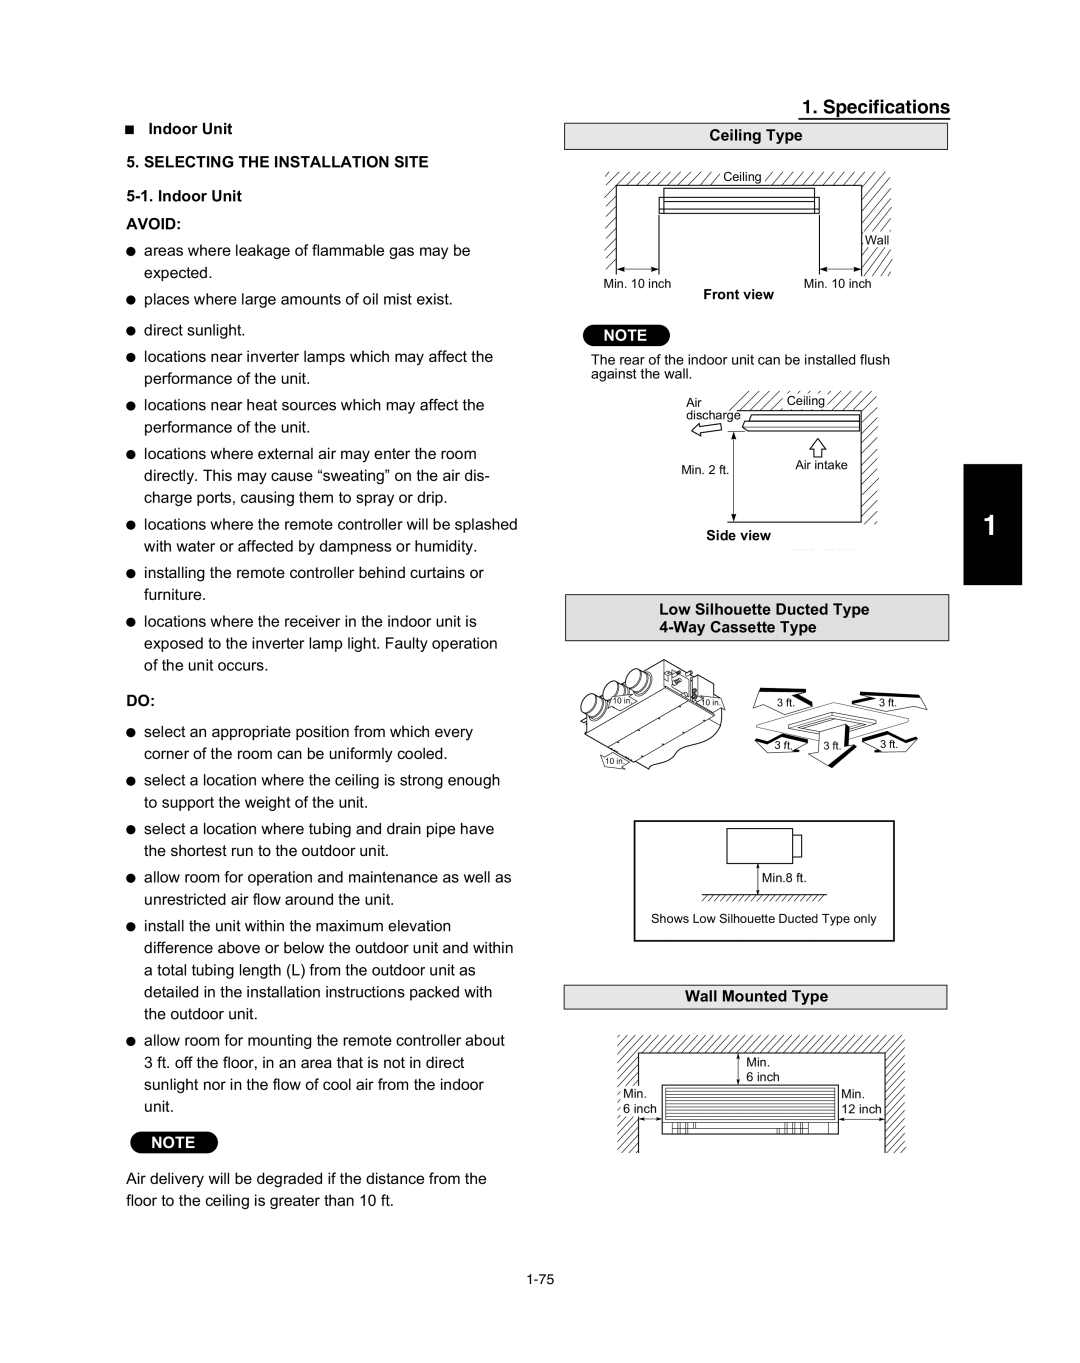 Panasonic R410A Specifications, Indoor Unit 5. SELECTING THE INSTALLATION SITE, Indoor Unit AVOID, Ceiling Type 